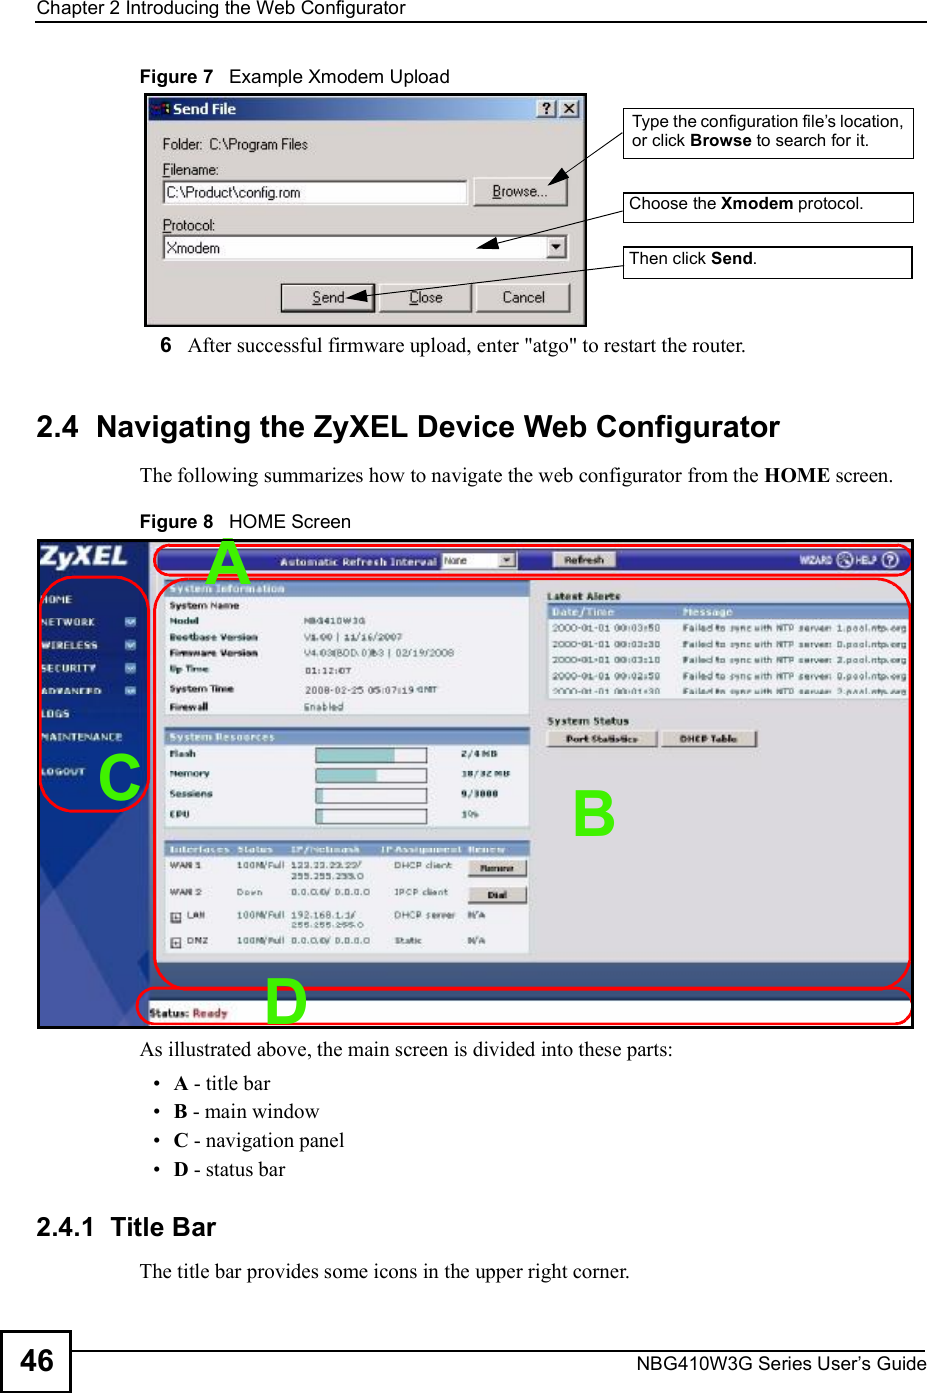 Chapter 2Introducing the Web ConfiguratorNBG410W3G Series User s Guide46Figure 7   Example Xmodem Upload6After successful firmware upload, enter &quot;atgo&quot; to restart the router.2.4  Navigating the ZyXEL Device Web ConfiguratorThe following summarizes how to navigate the web configurator from the HOME screen.Figure 8   HOME ScreenAs illustrated above, the main screen is divided into these parts: A - title bar B - main window C - navigation panel D - status bar2.4.1  Title BarThe title bar provides some icons in the upper right corner.Type the configuration file s location, or click Browse to search for it.Choose the Xmodem protocol.Then click Send.CDBA